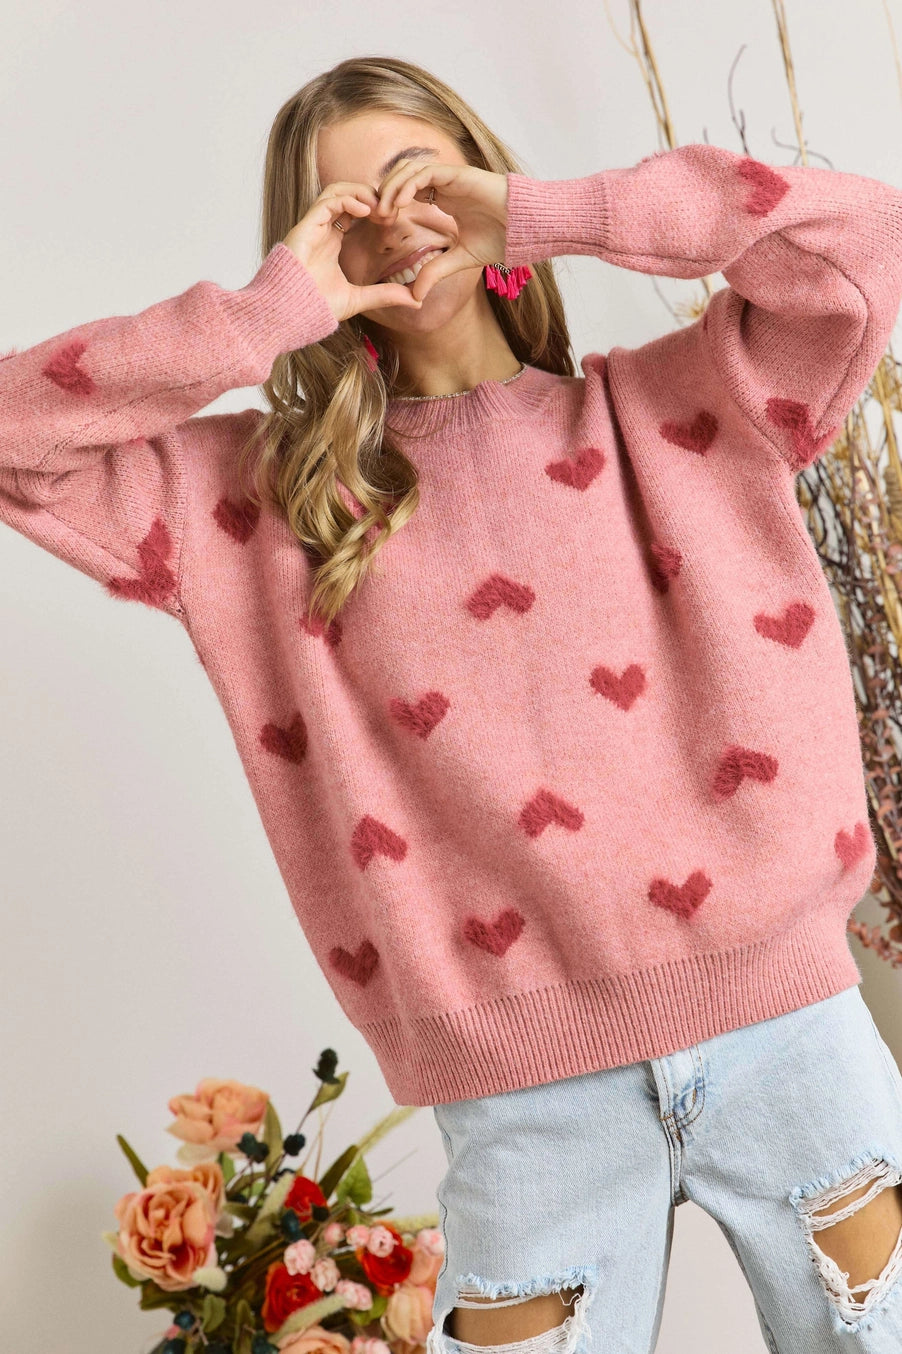 Satinior Knit Patchwork Heart Top Is the Sweetest Winter Sweater